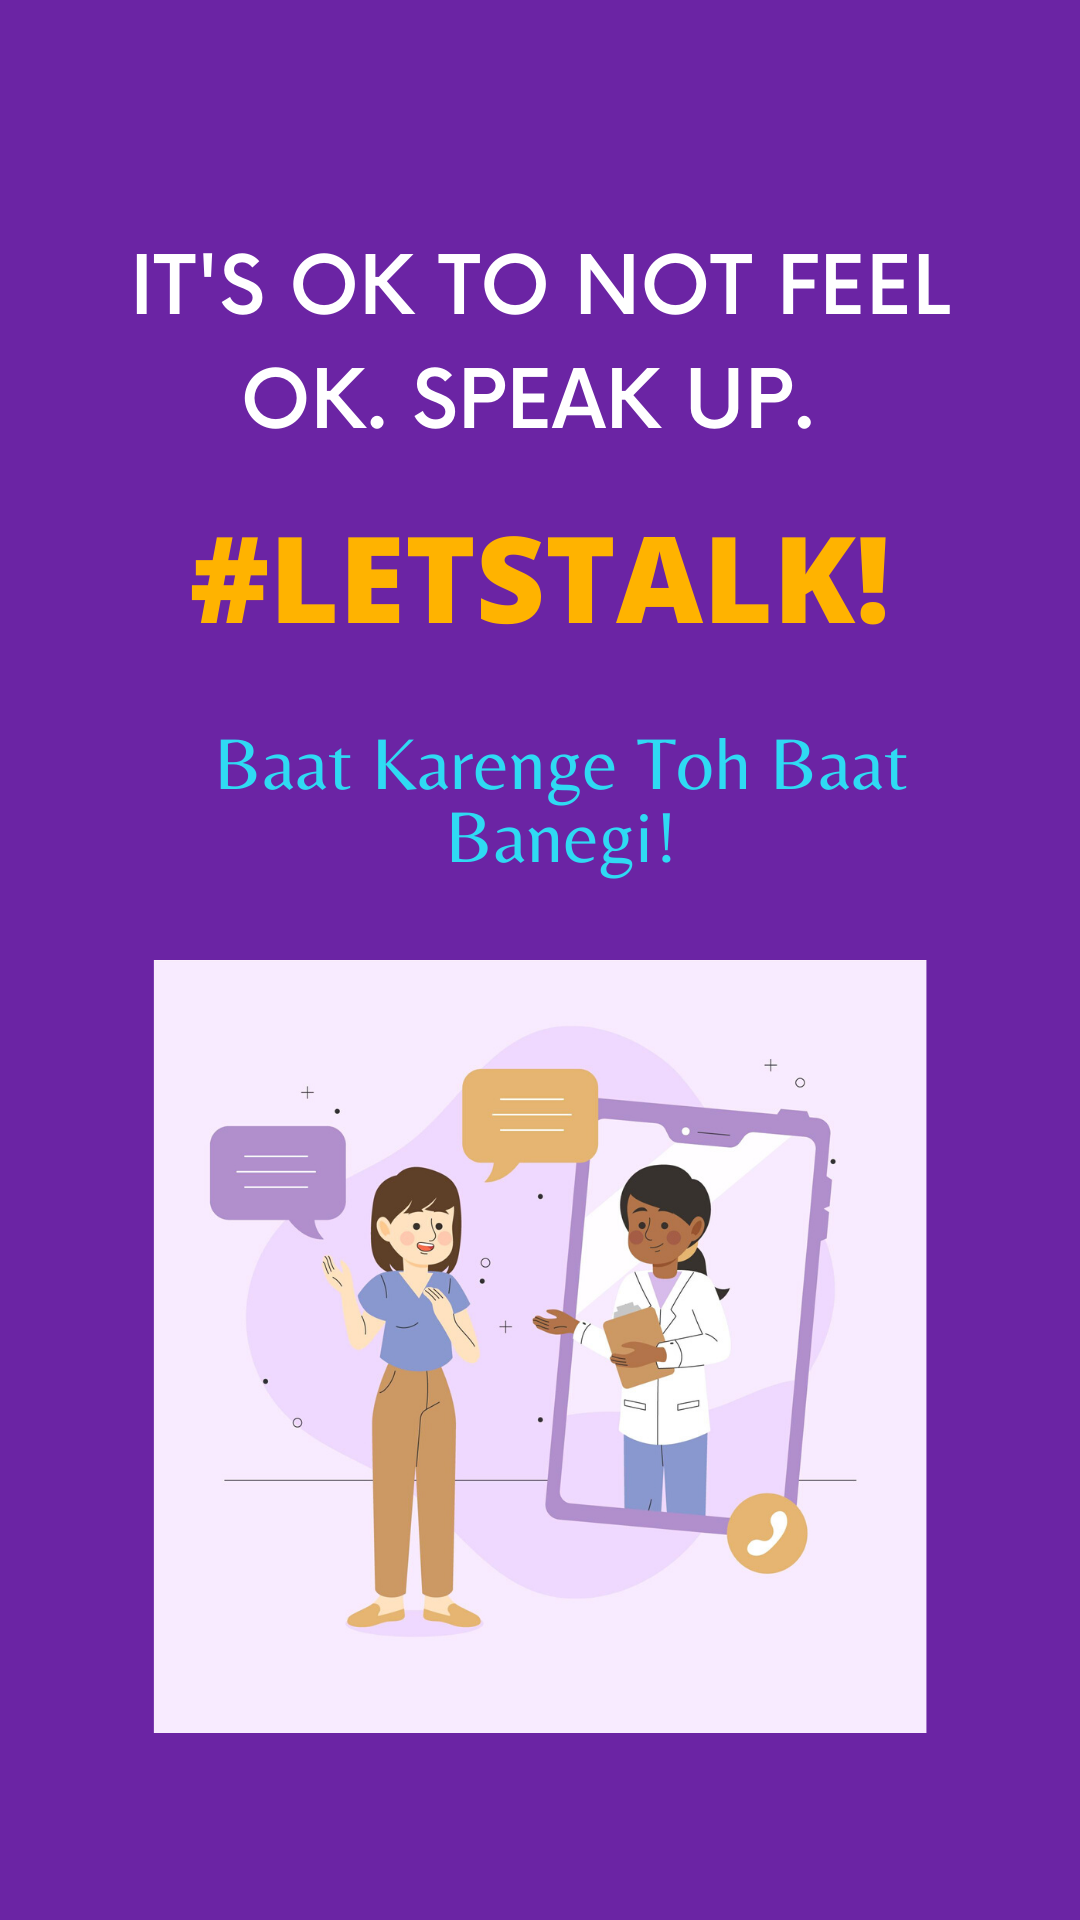 do-your-thng-launches-mental-health-campaign-baat-karenge-toh-baat-banegi-with-lets-talk